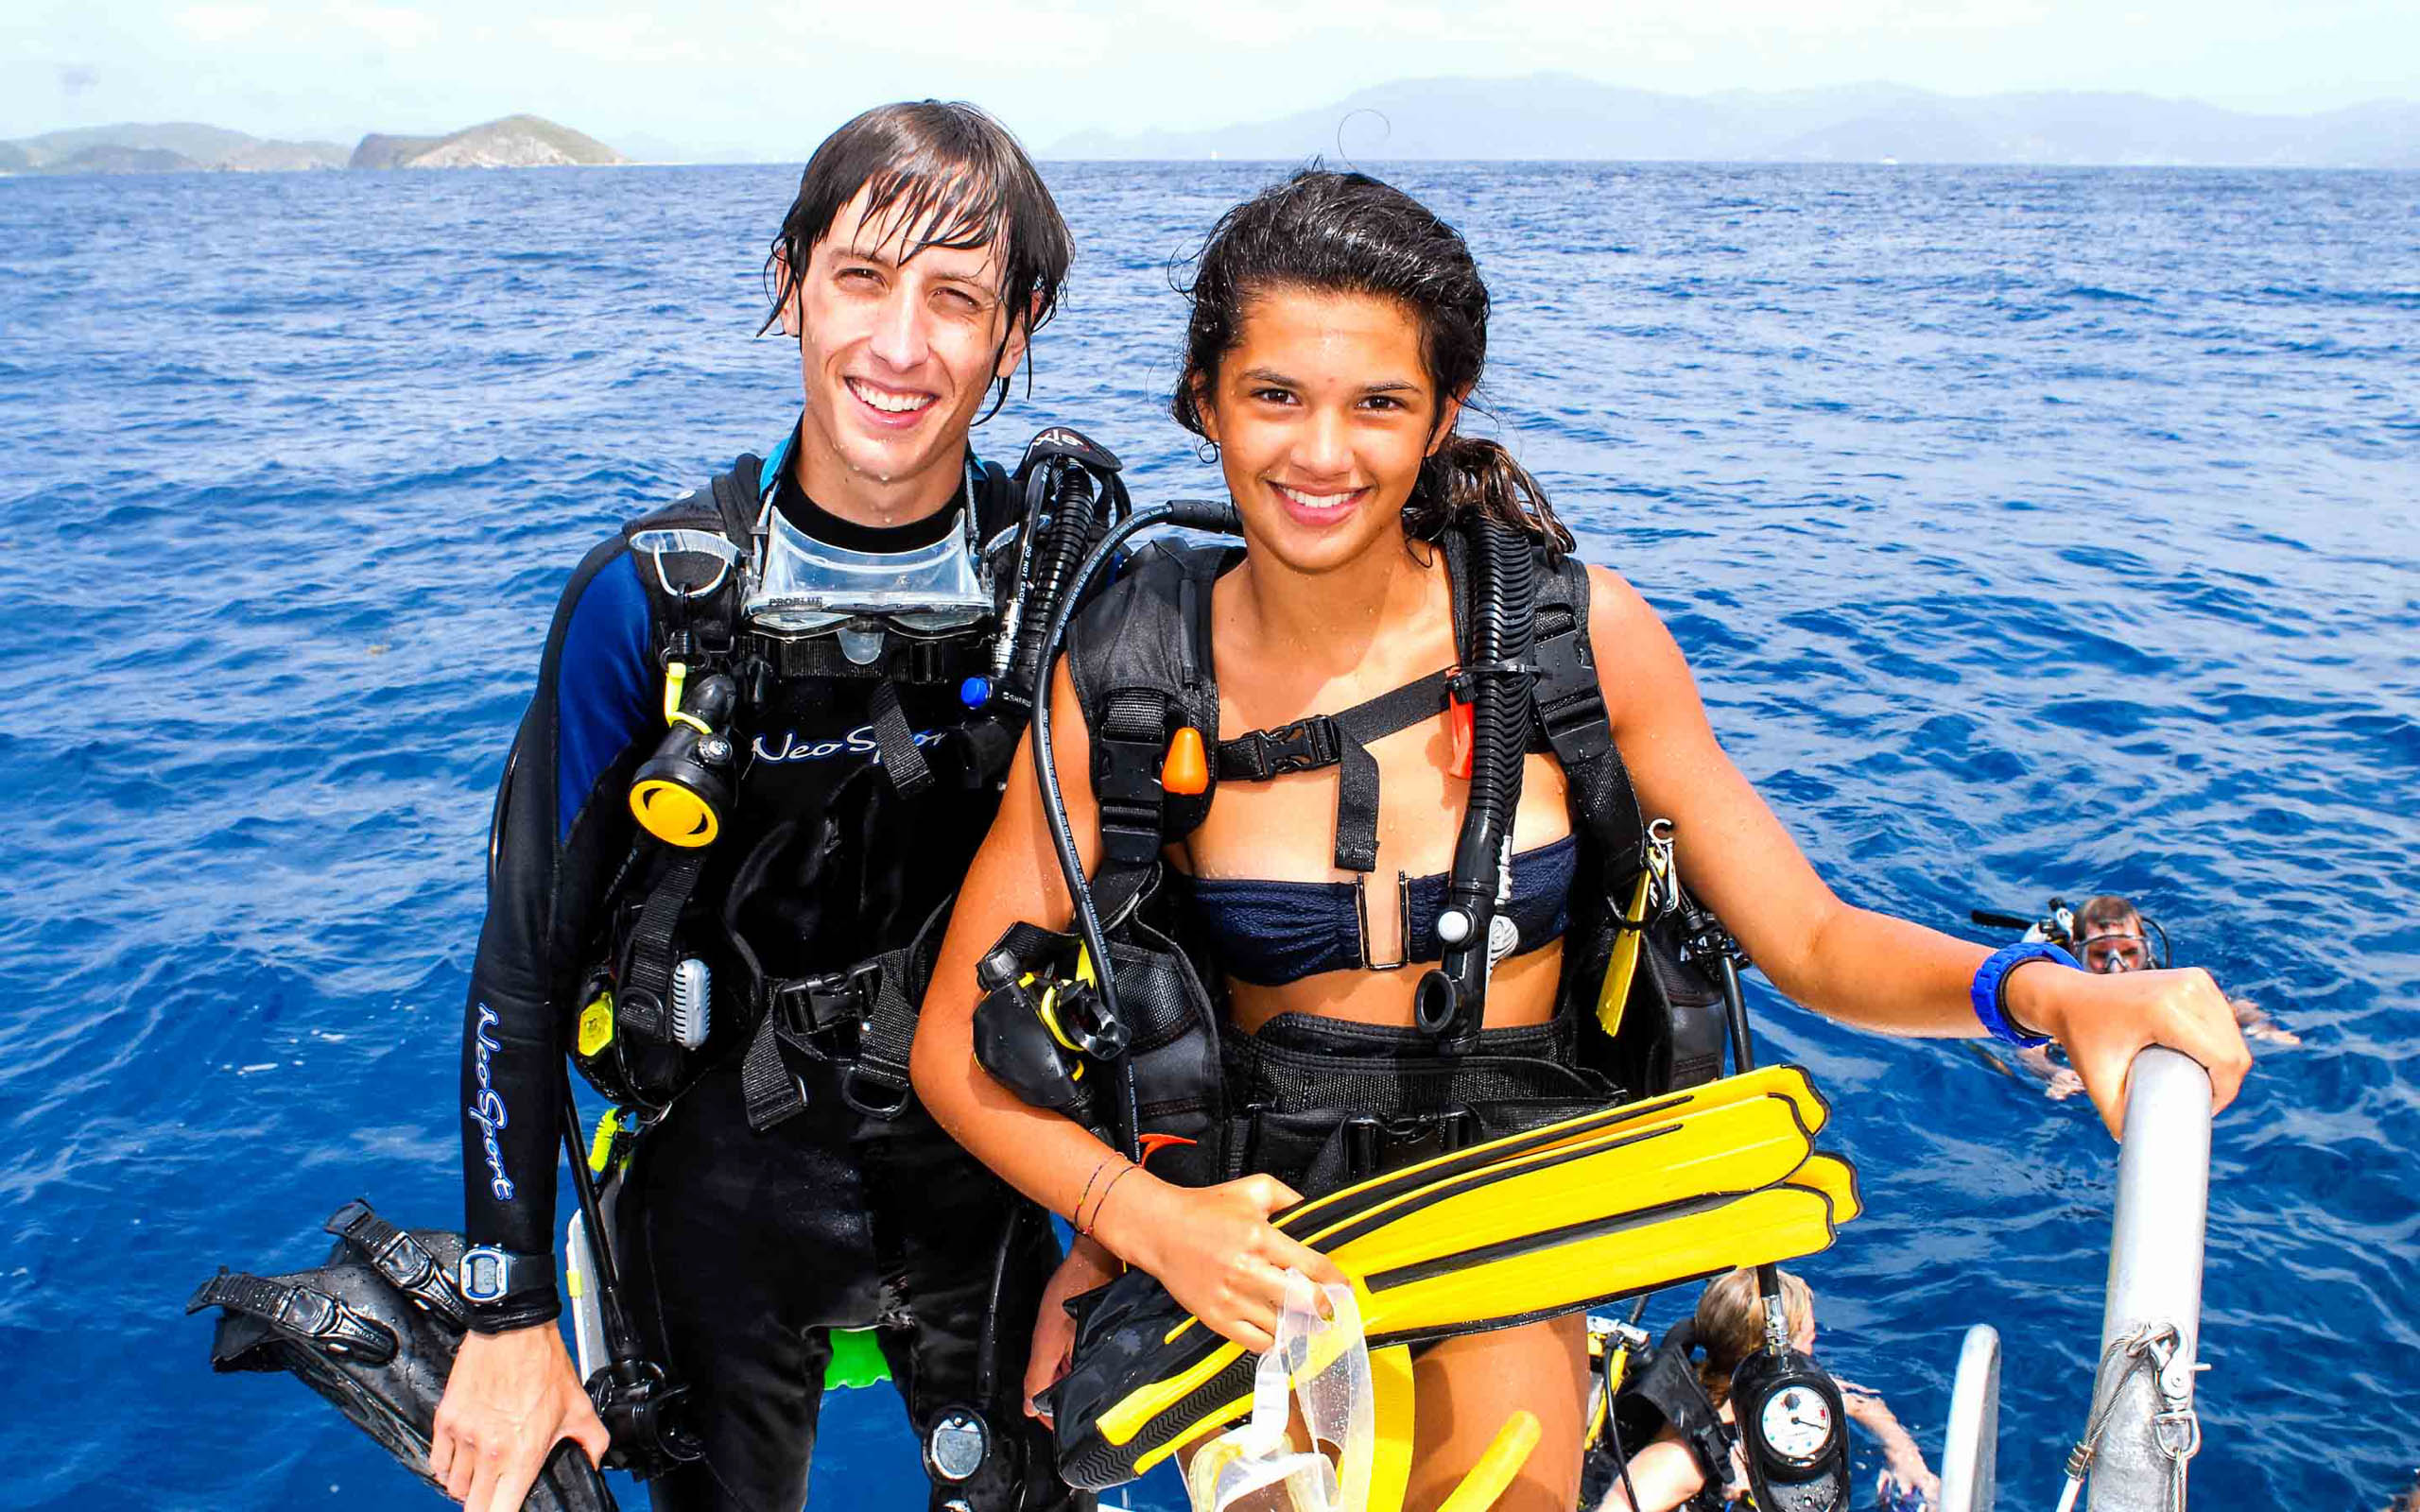 A man and woman scuba diving on a boat.